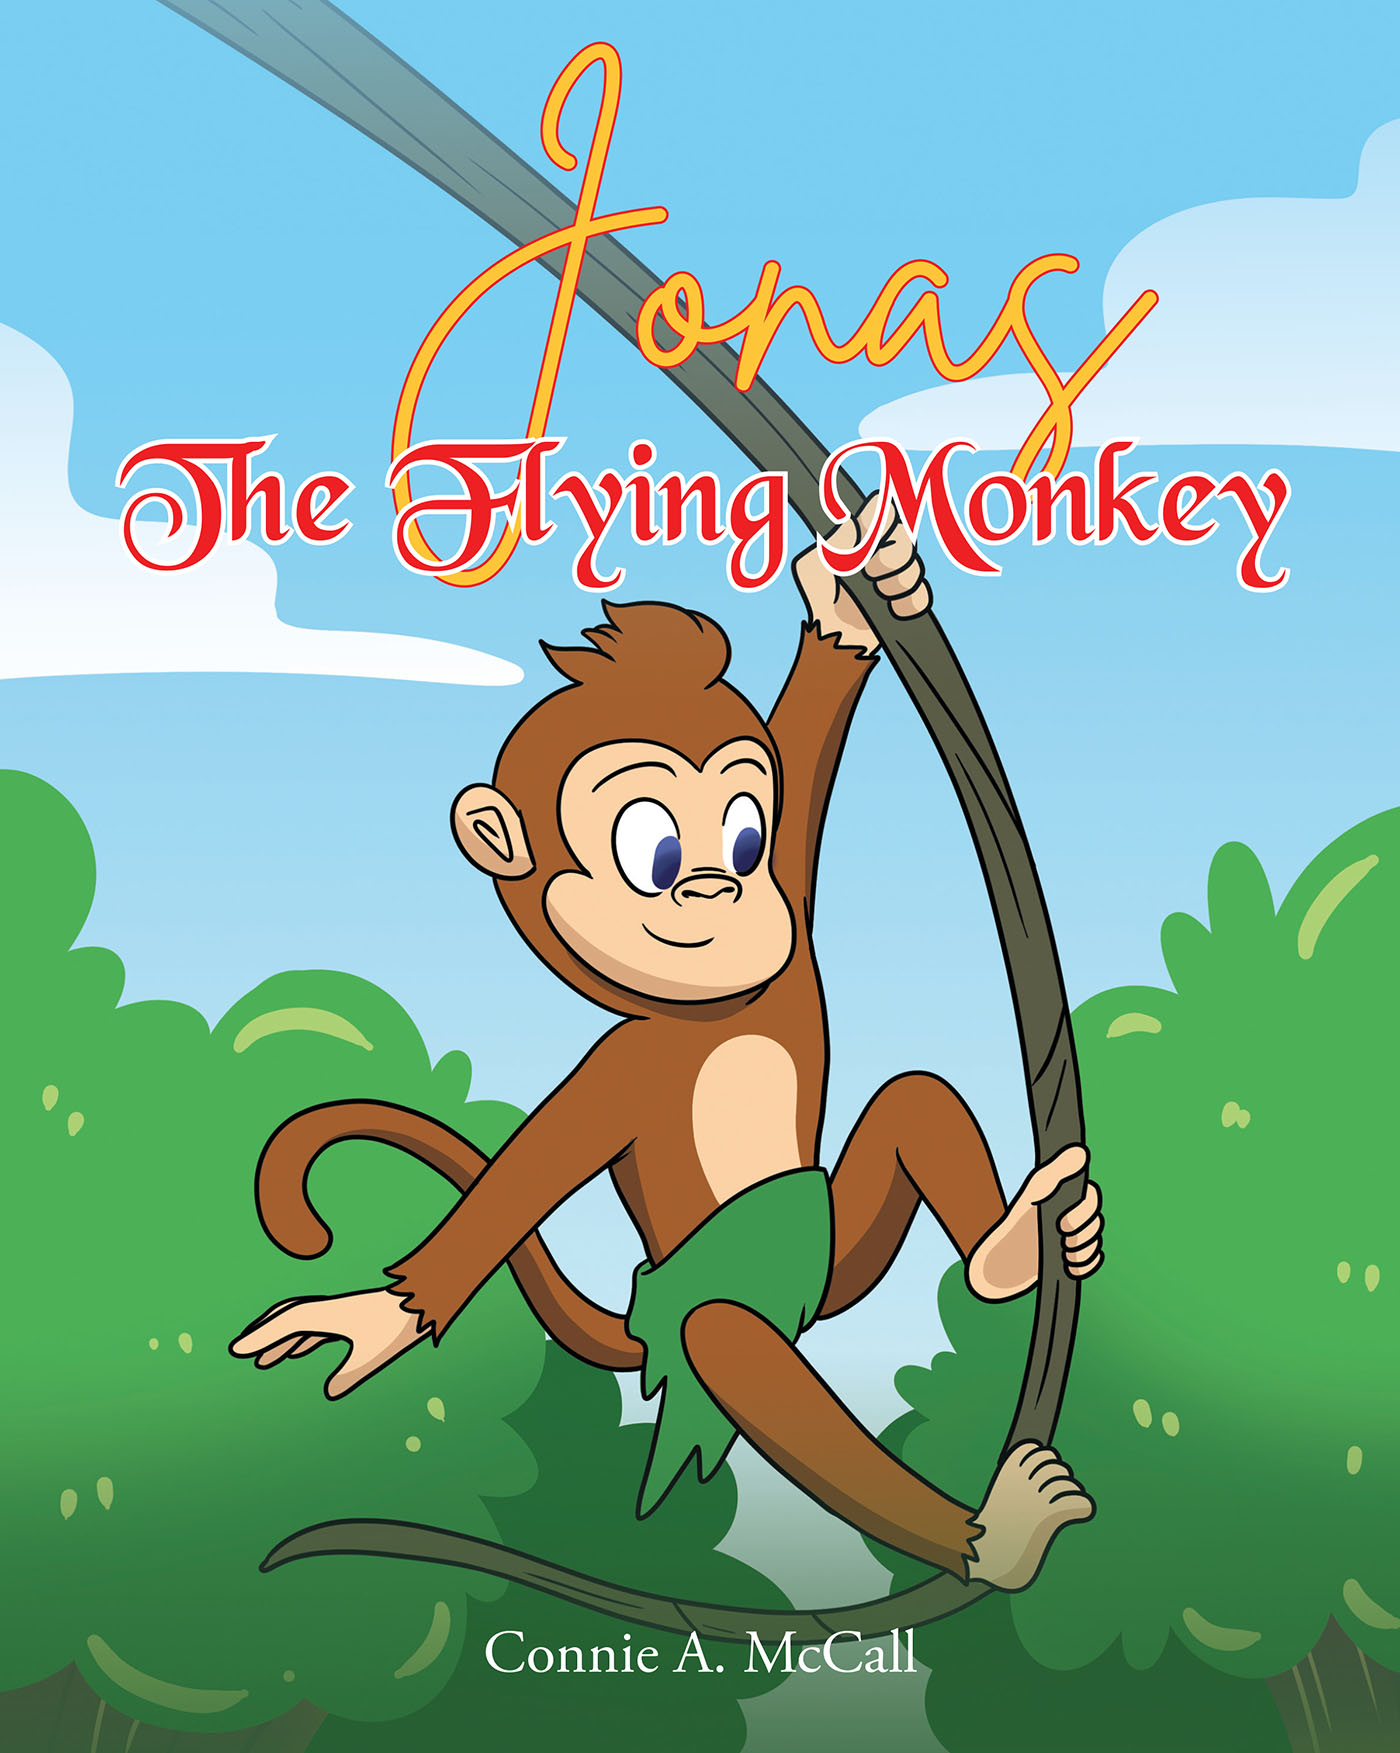 Connie A. McCall’s Newly Released "Jonas the Flying Monkey" is a Sweet Story of a Determined Little Monkey with a Sense of God’s Importance